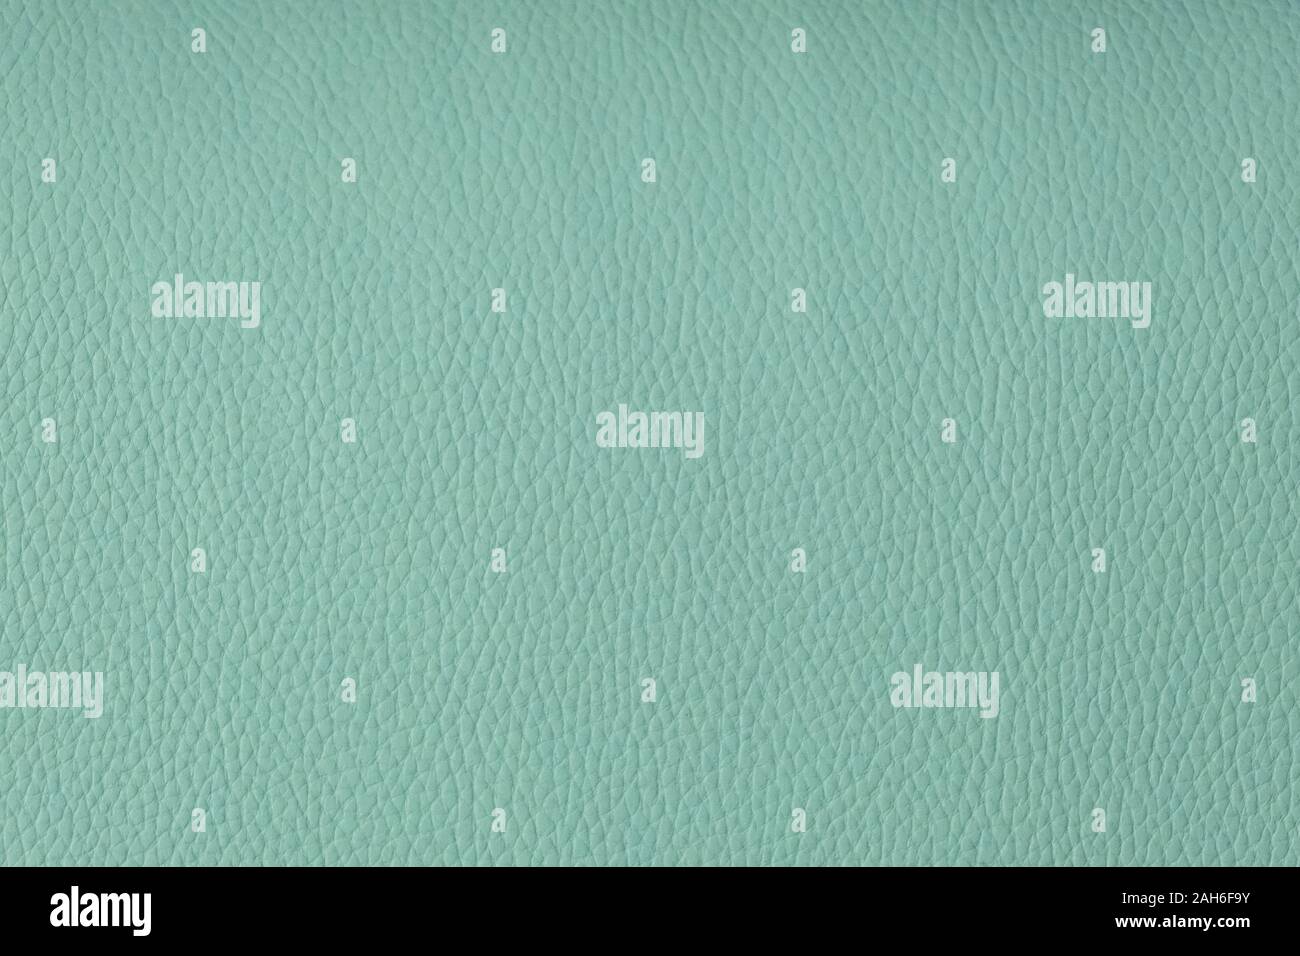 Real ostrich leather pattern background Stock Photo - Alamy